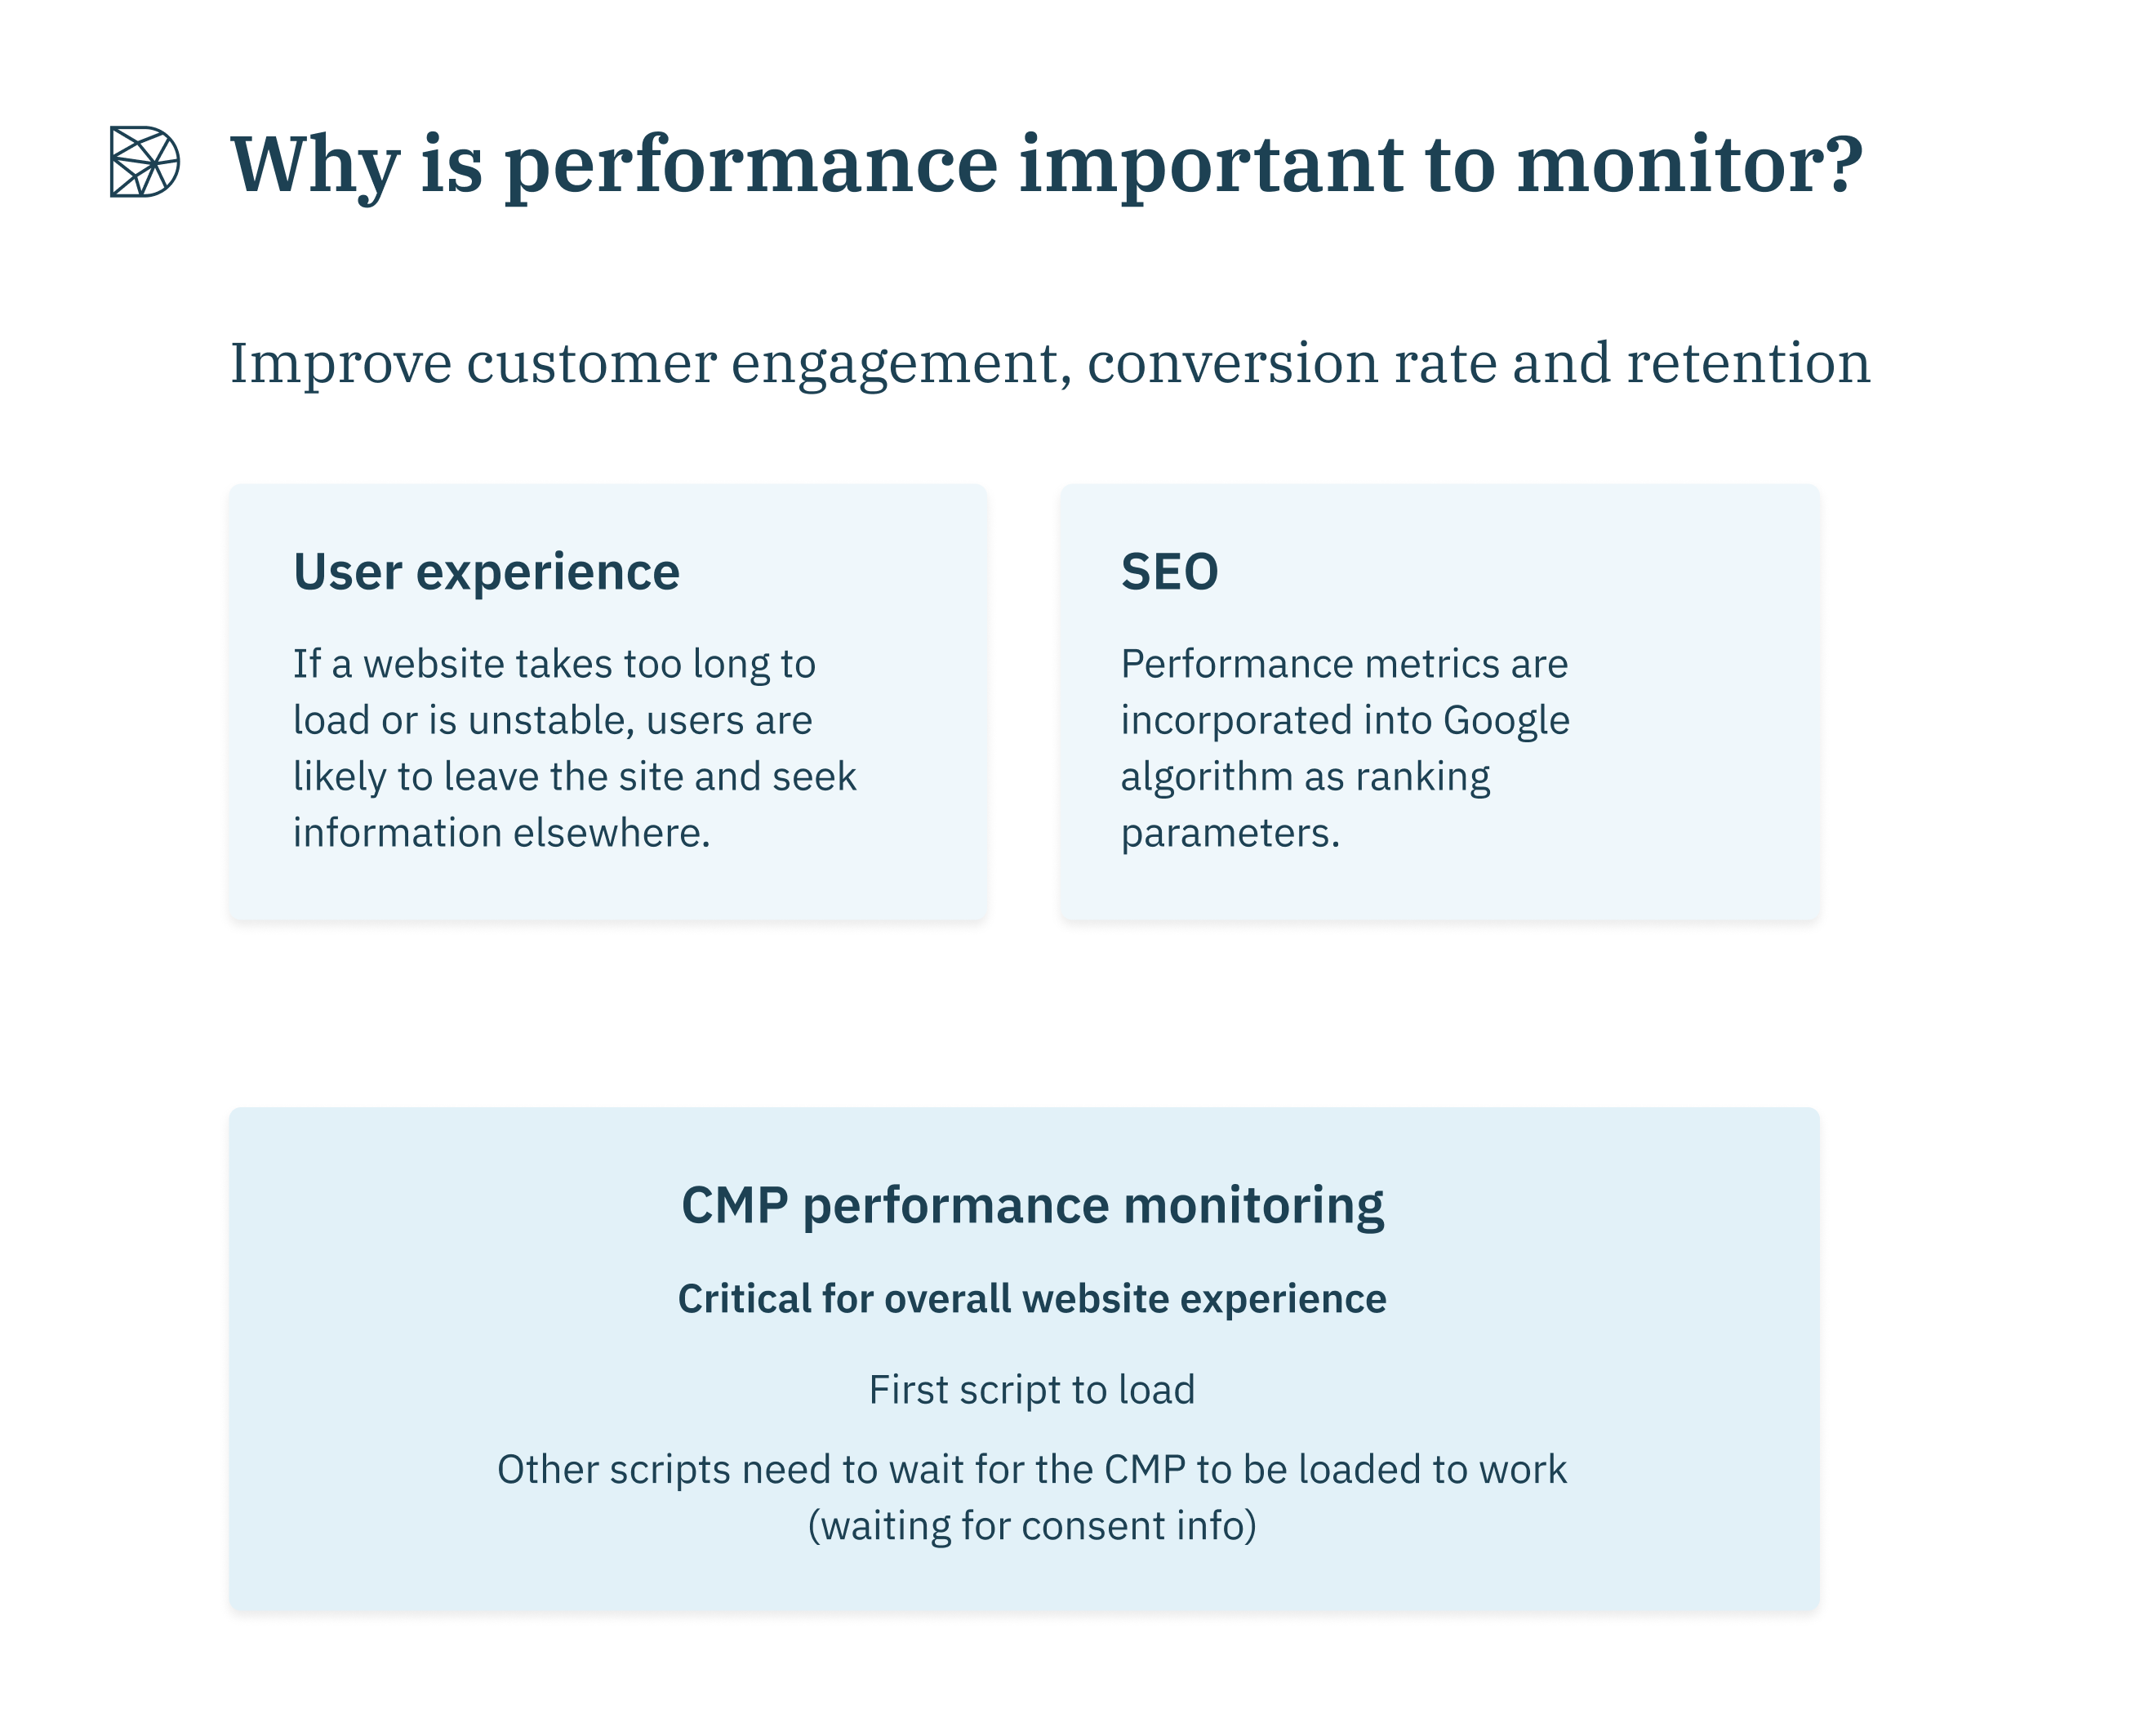 Website Monitoring: Why It Is Important?